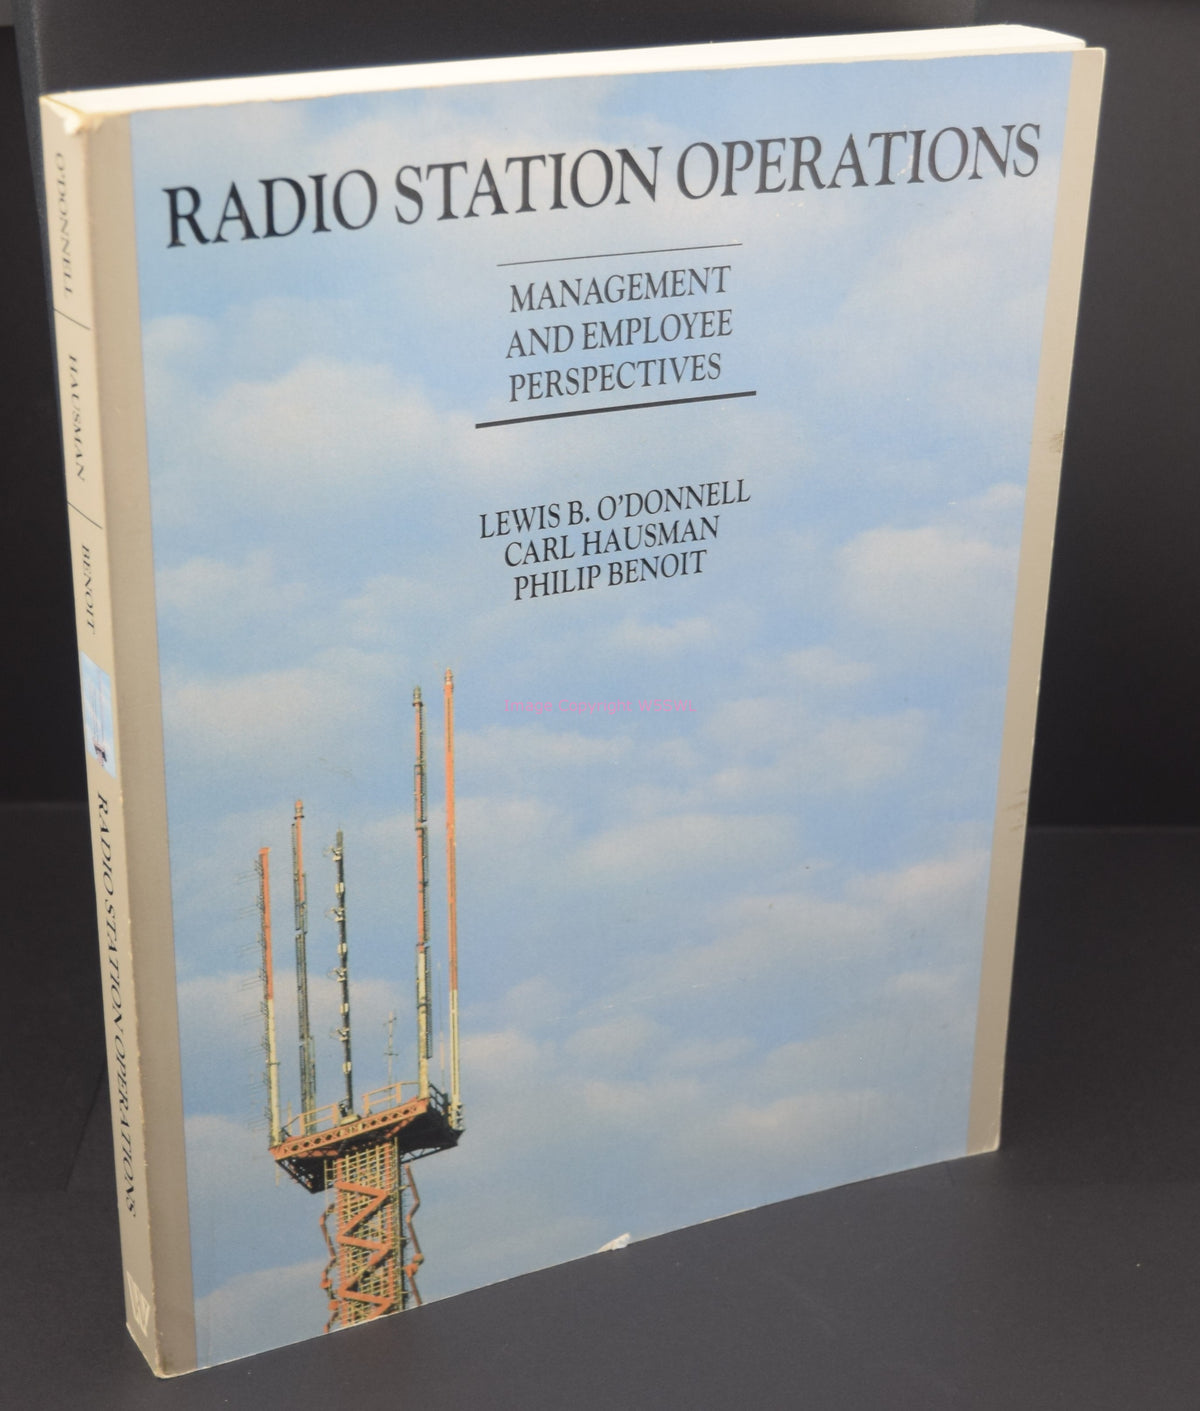 Radio Station Operations - Management And Employee Perspectives - Dave's Hobby Shop by W5SWL